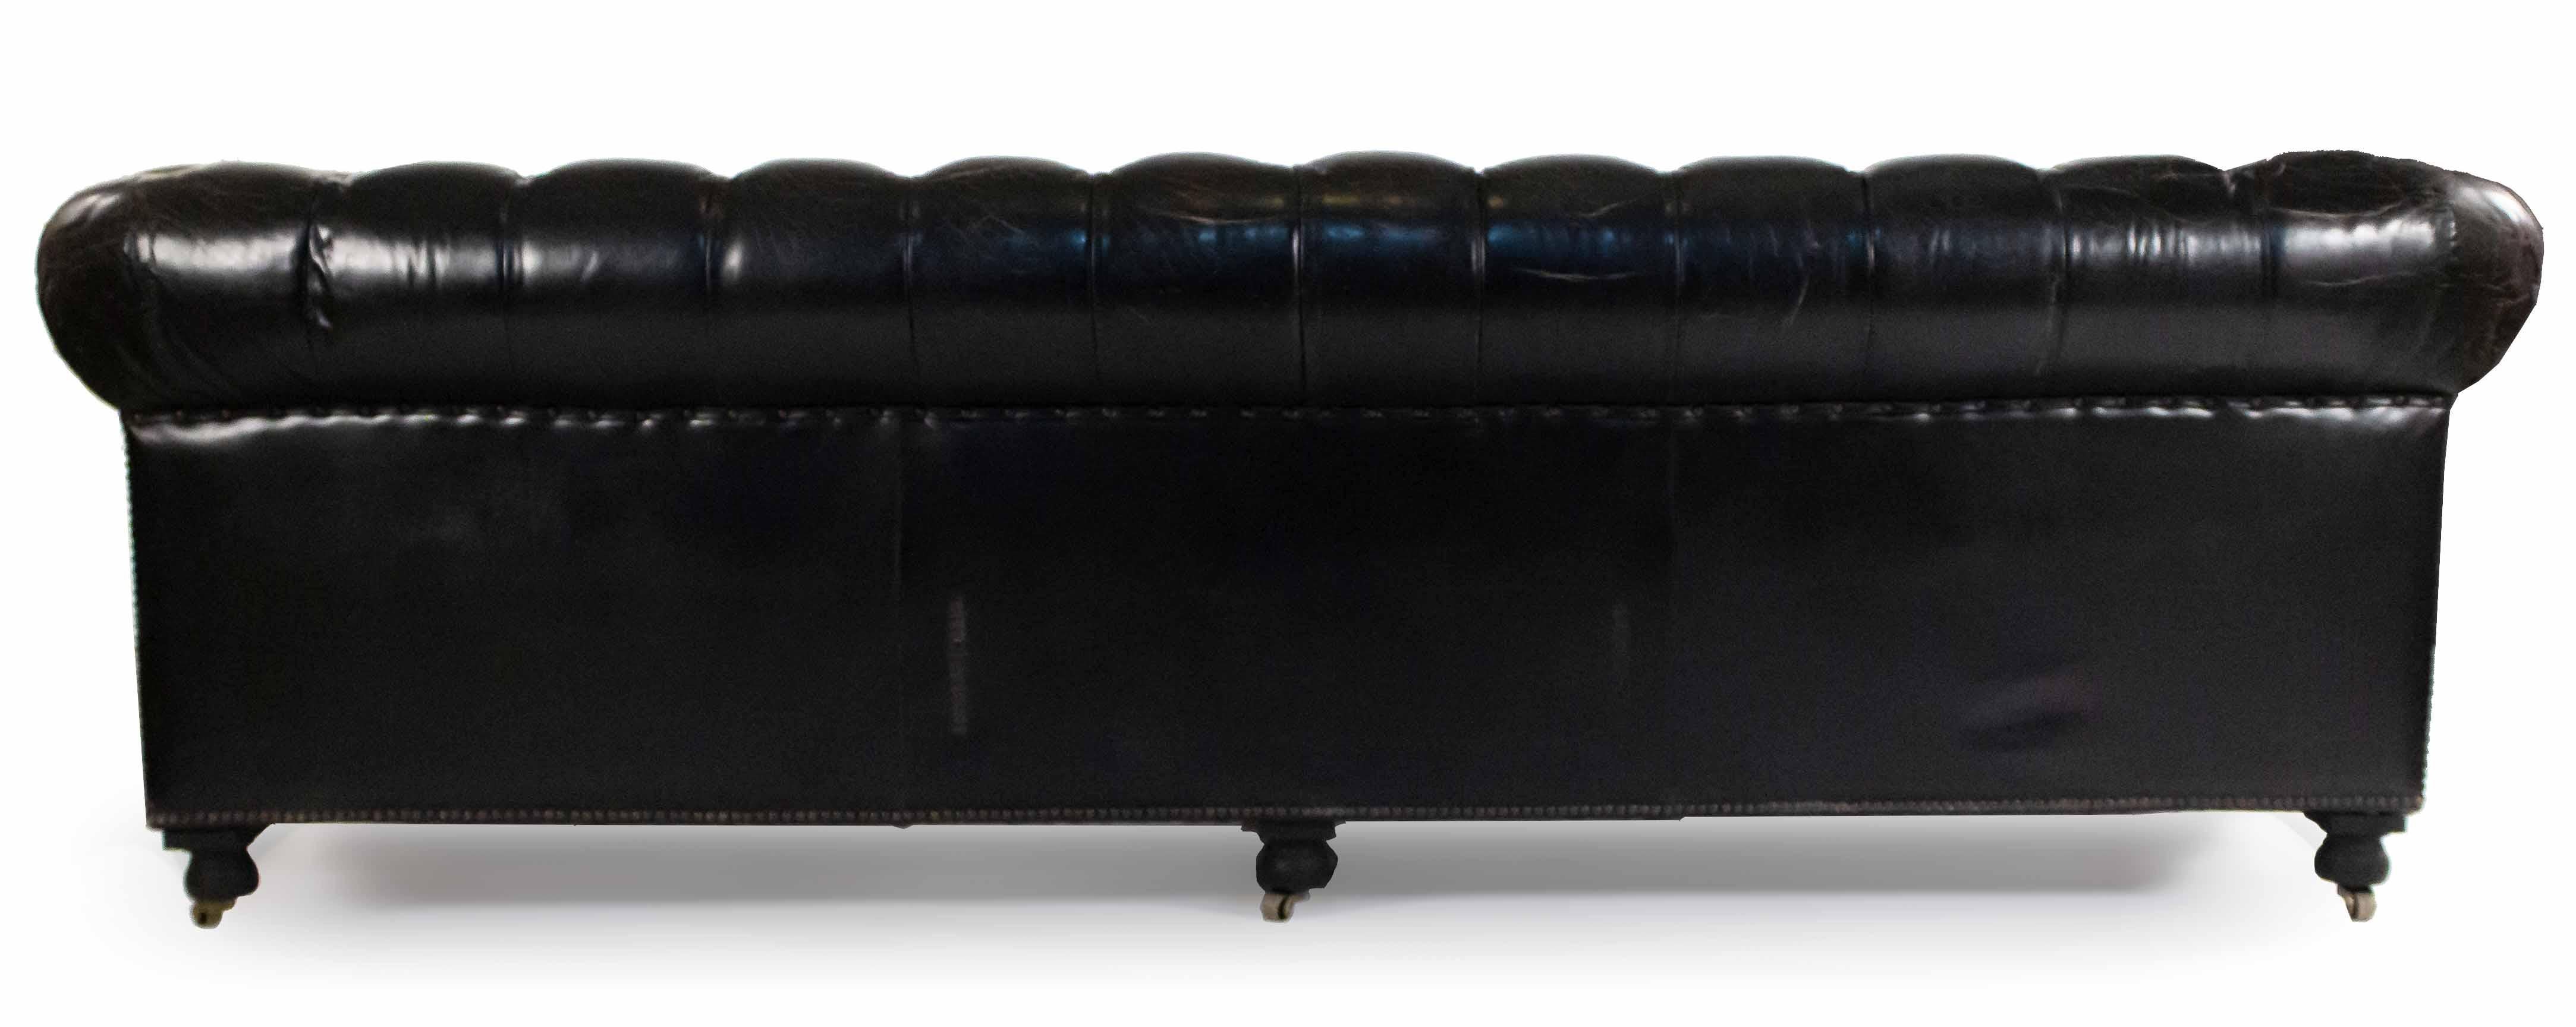 19th Century Black Leather Chesterfield Sofa